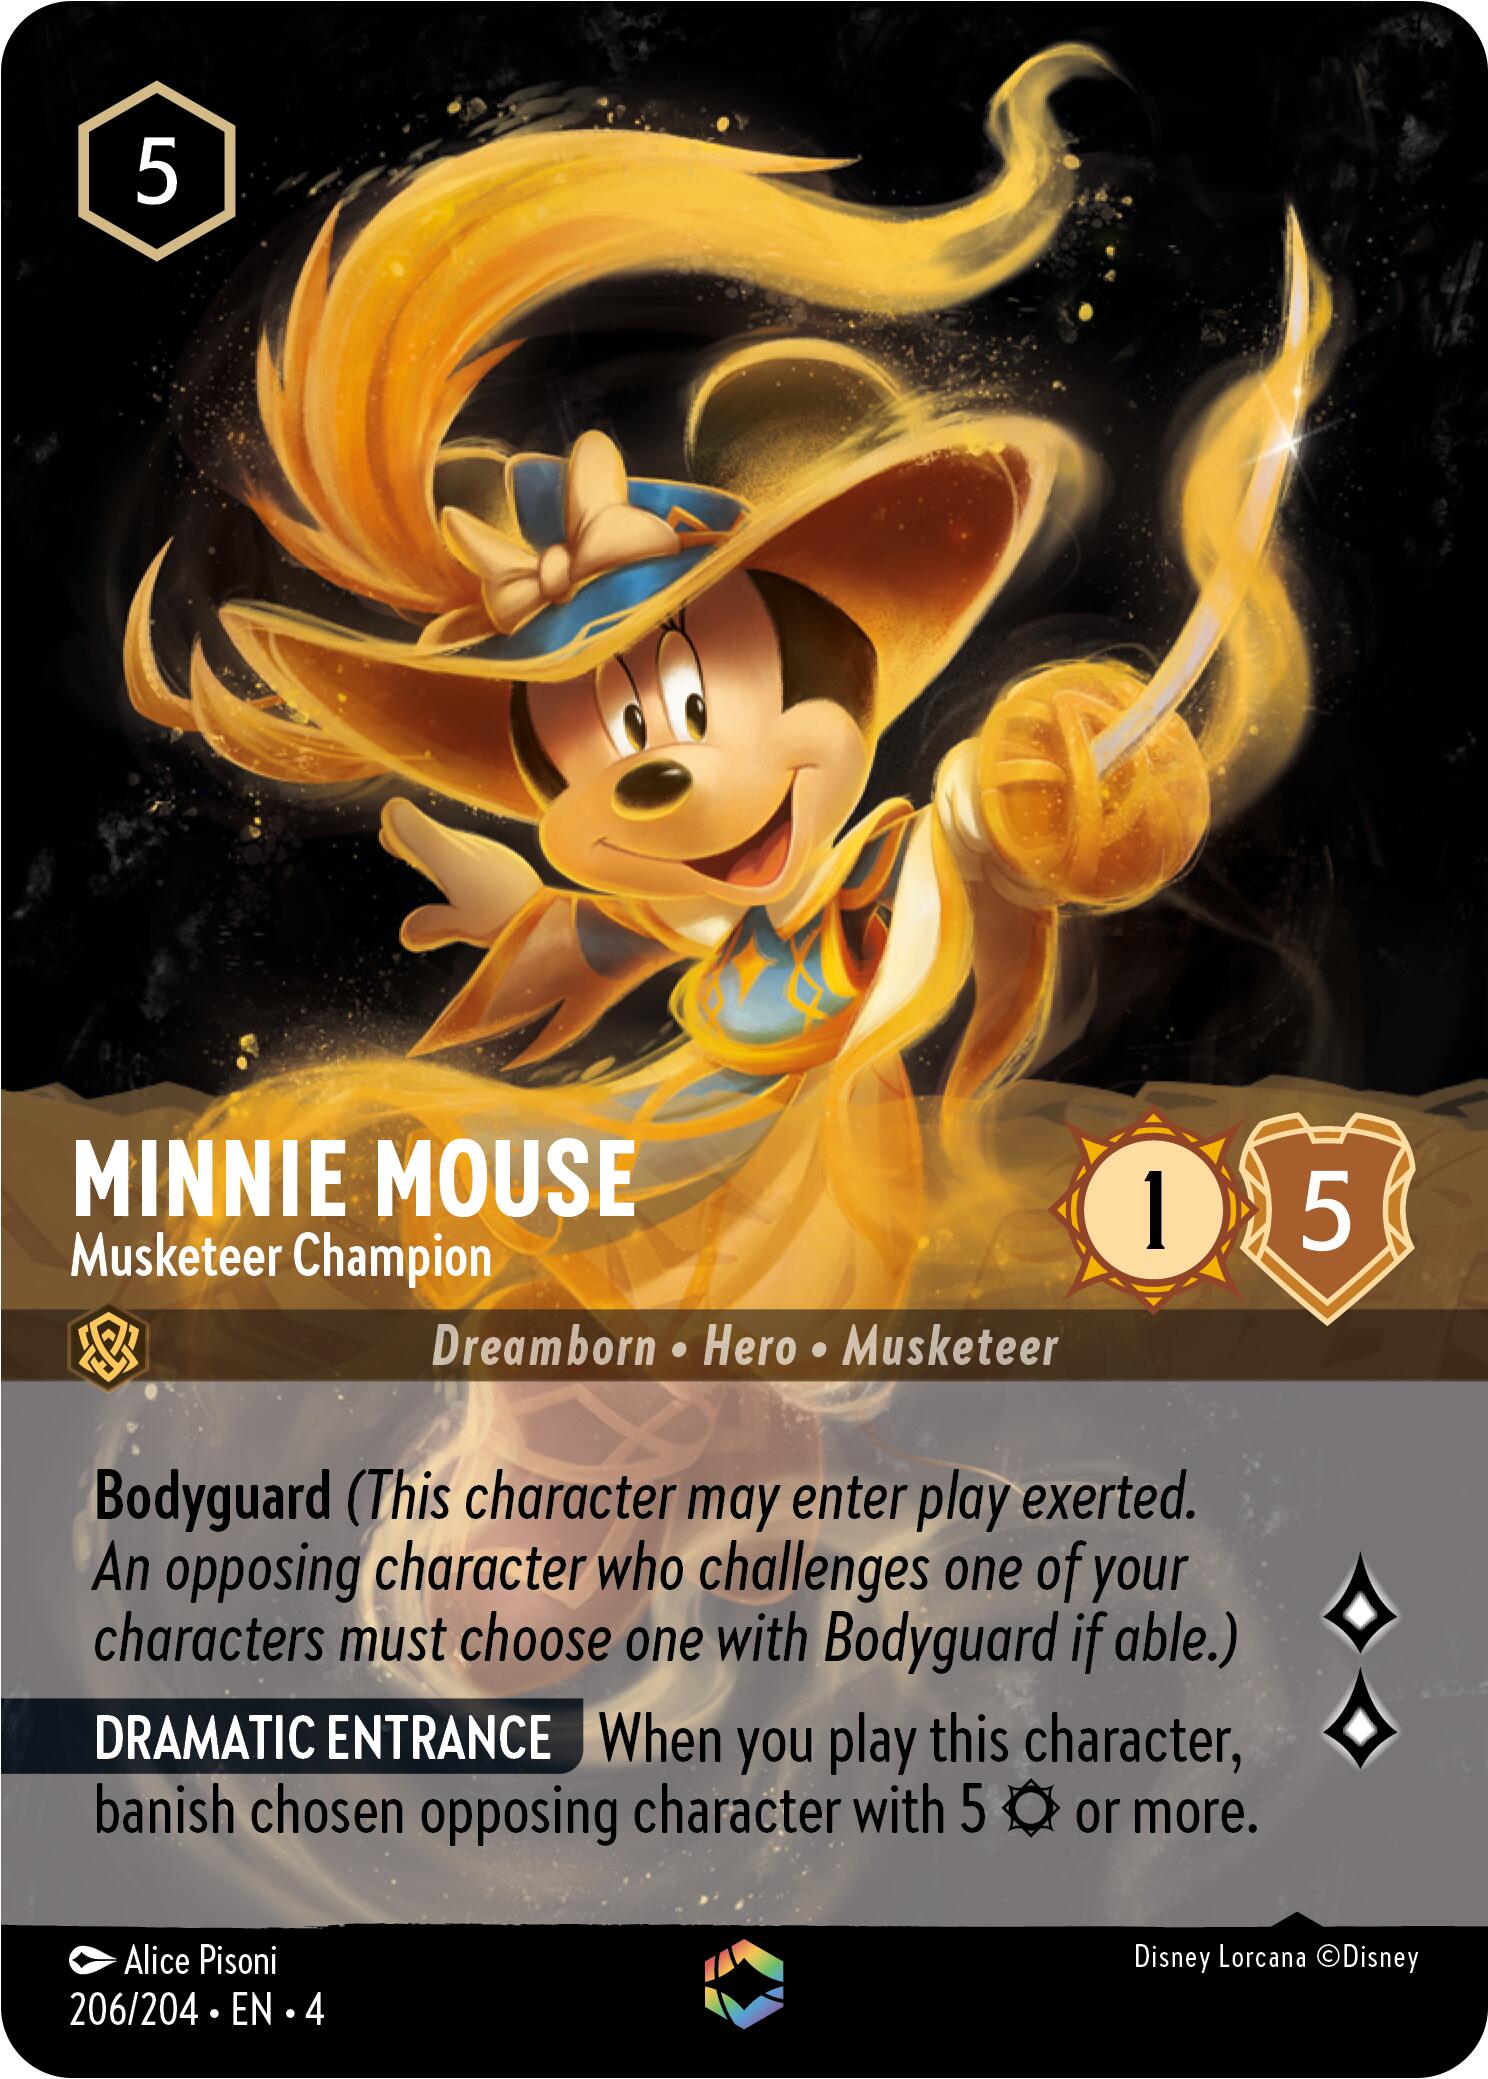 Minnie Mouse - Musketeer Champion (Enchanted) (206/204) [Ursula's Return] | Yard's Games Ltd